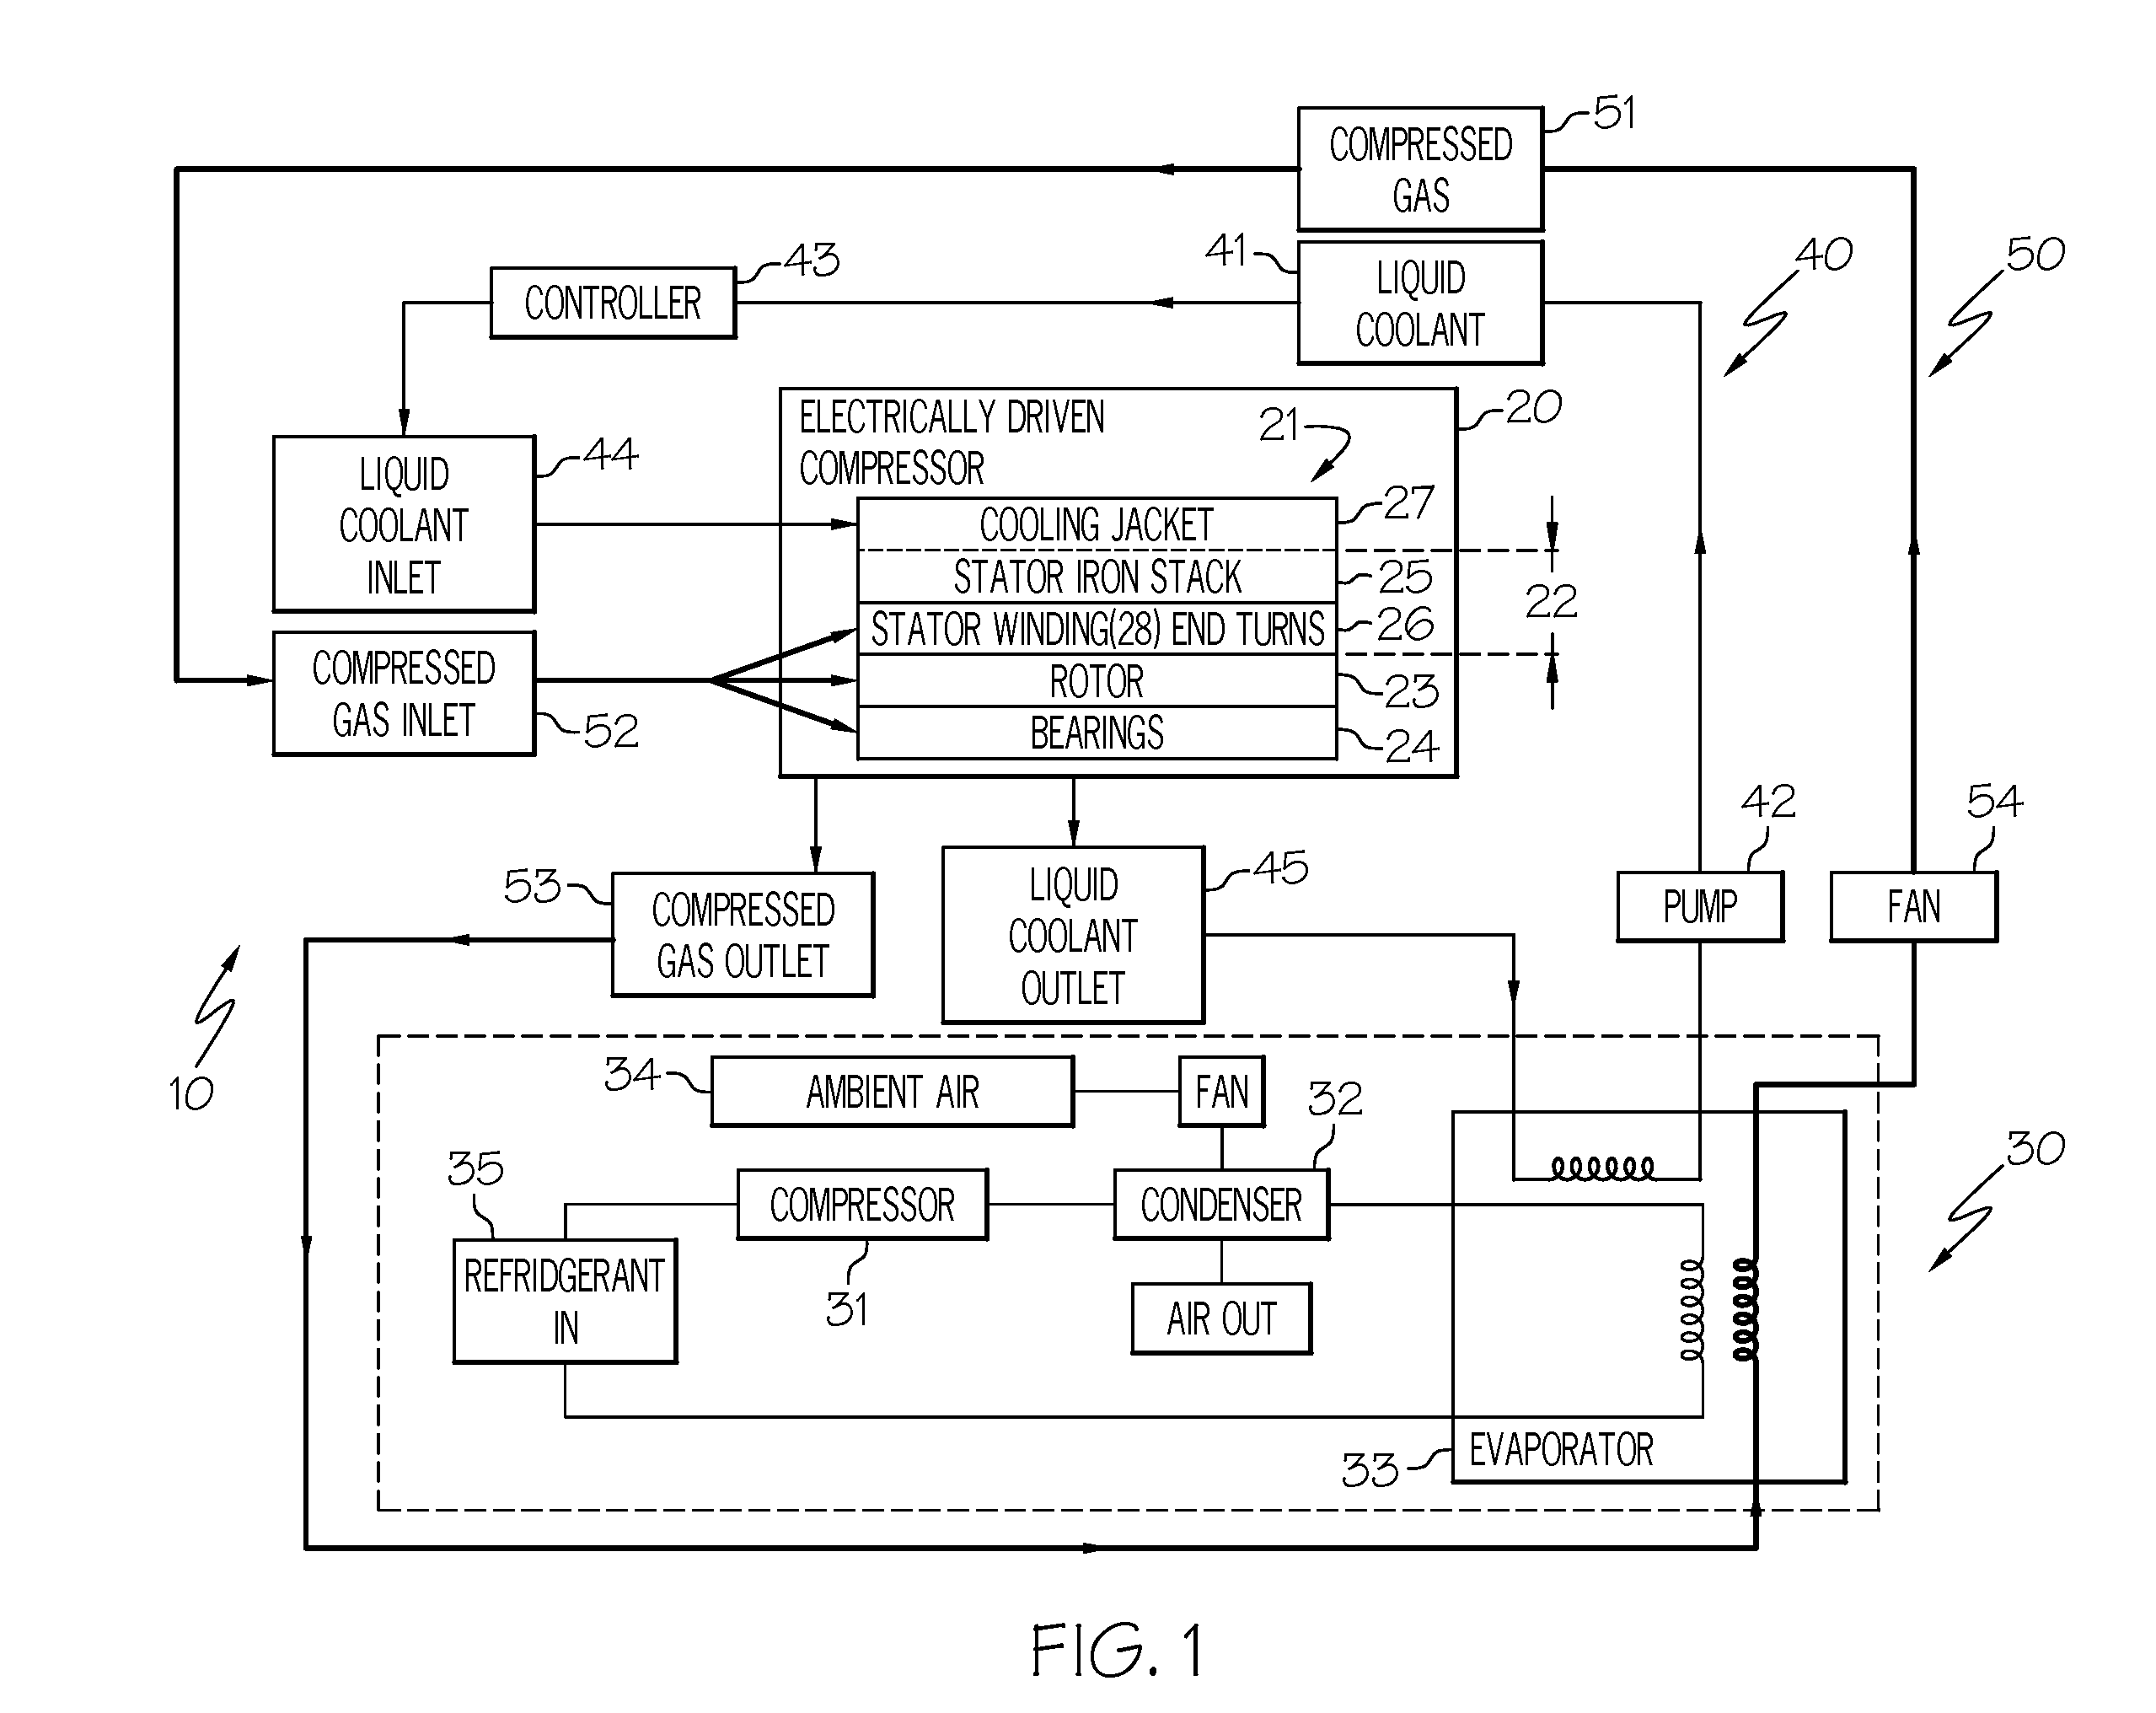 Thermal and secondary flow management of electrically driven compressors